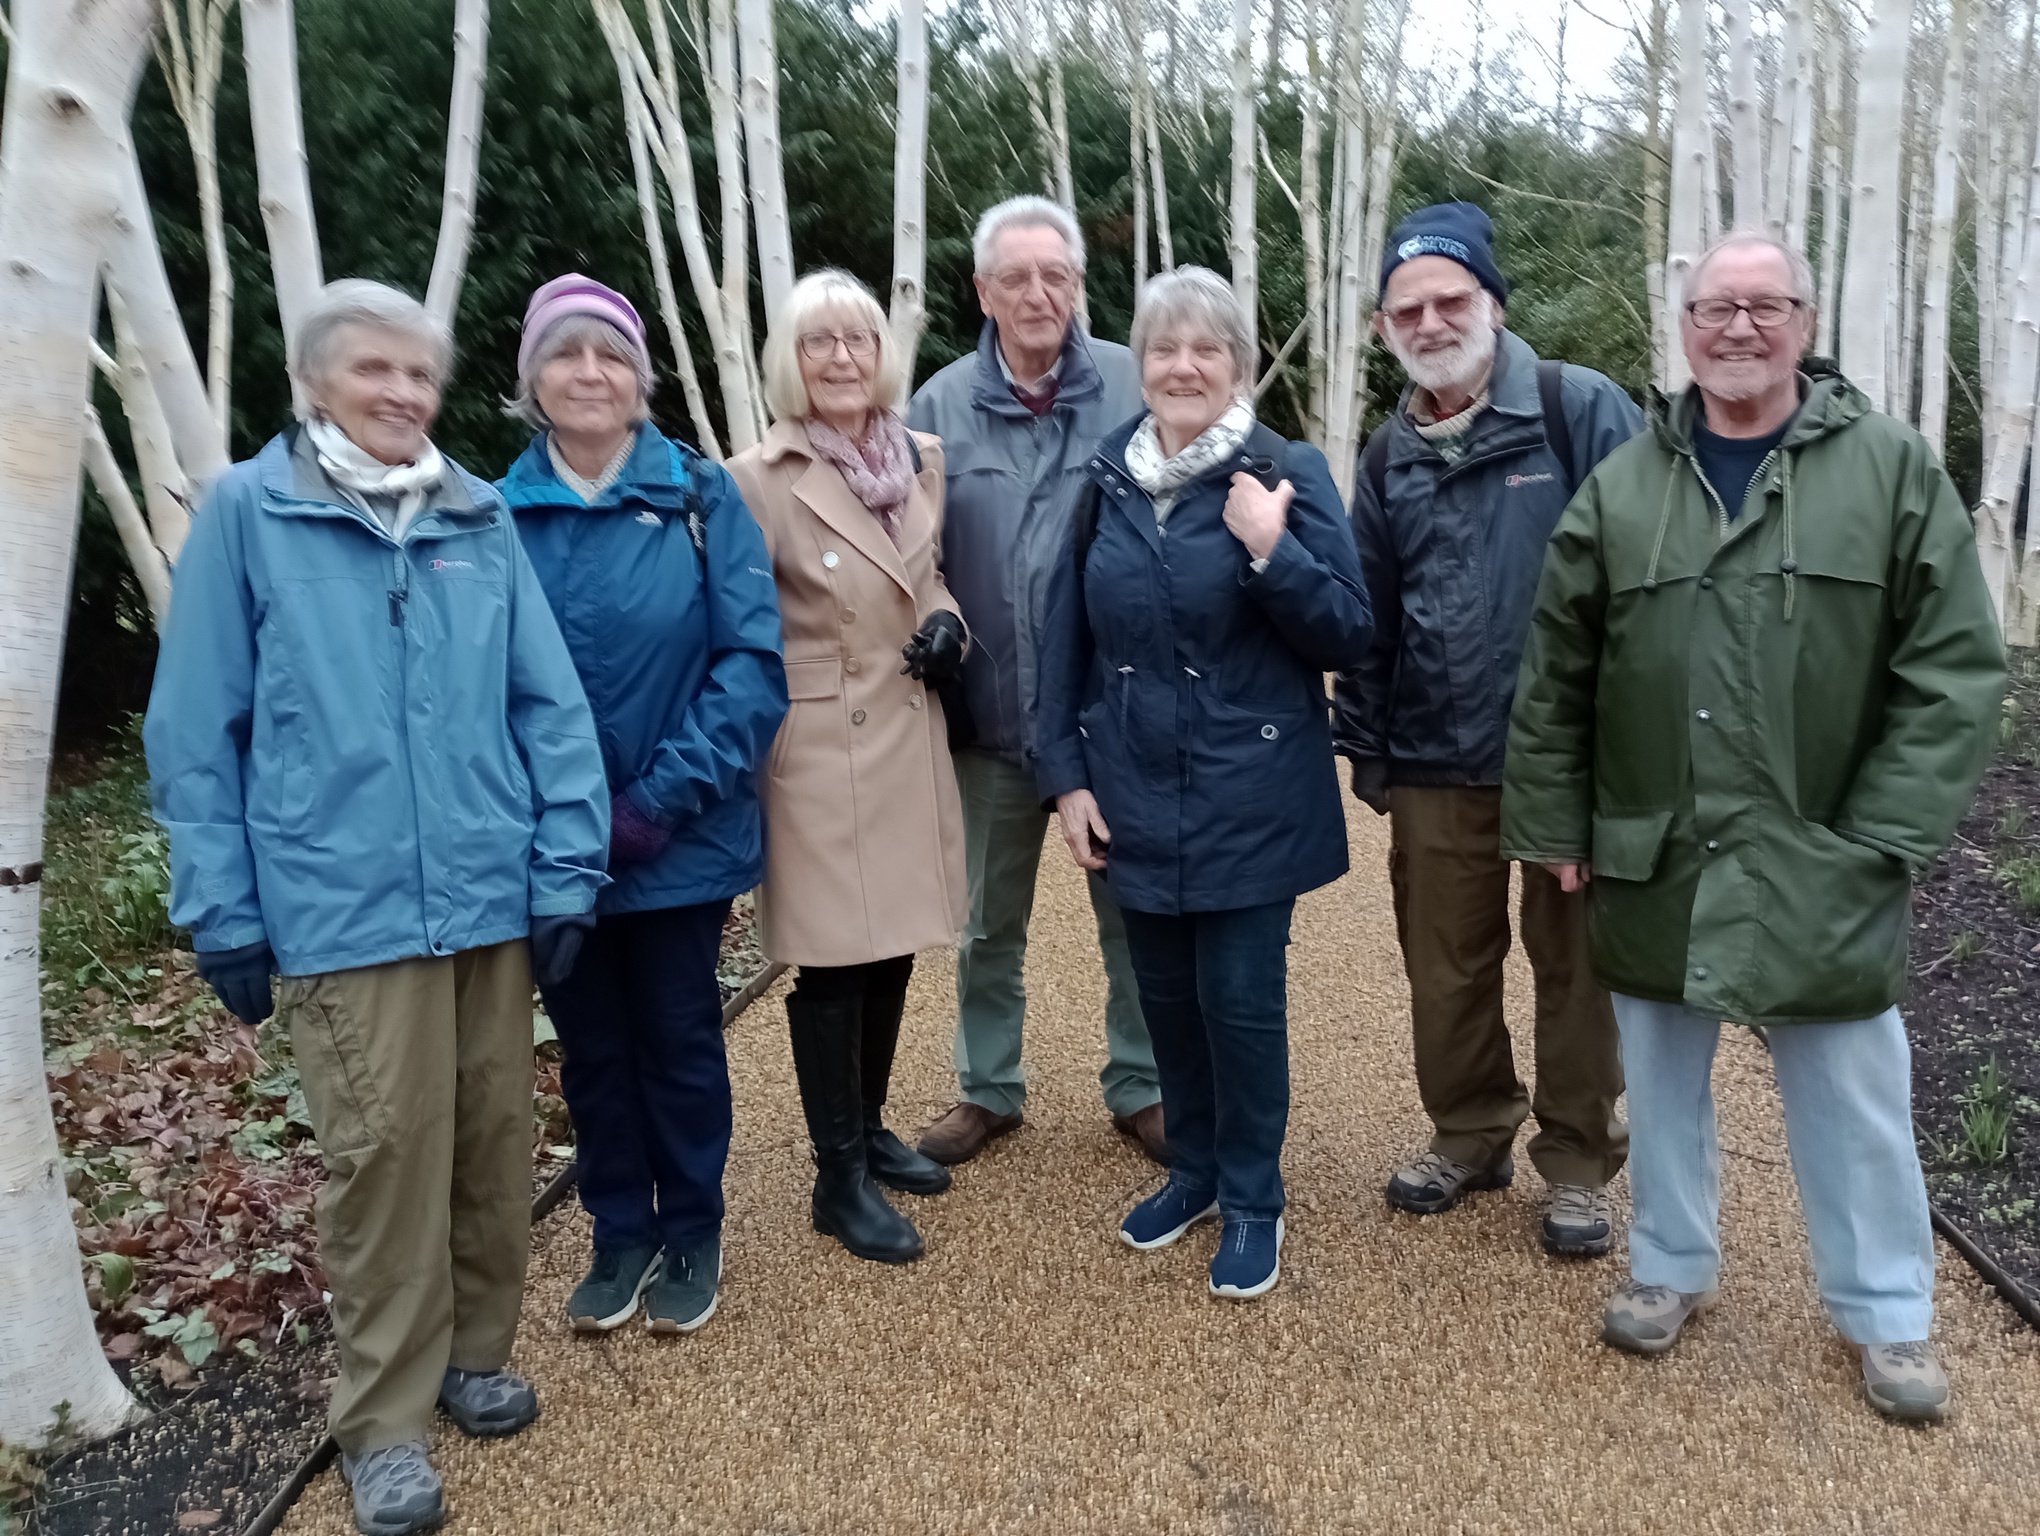 Gardening Group at Anglesey Abbey